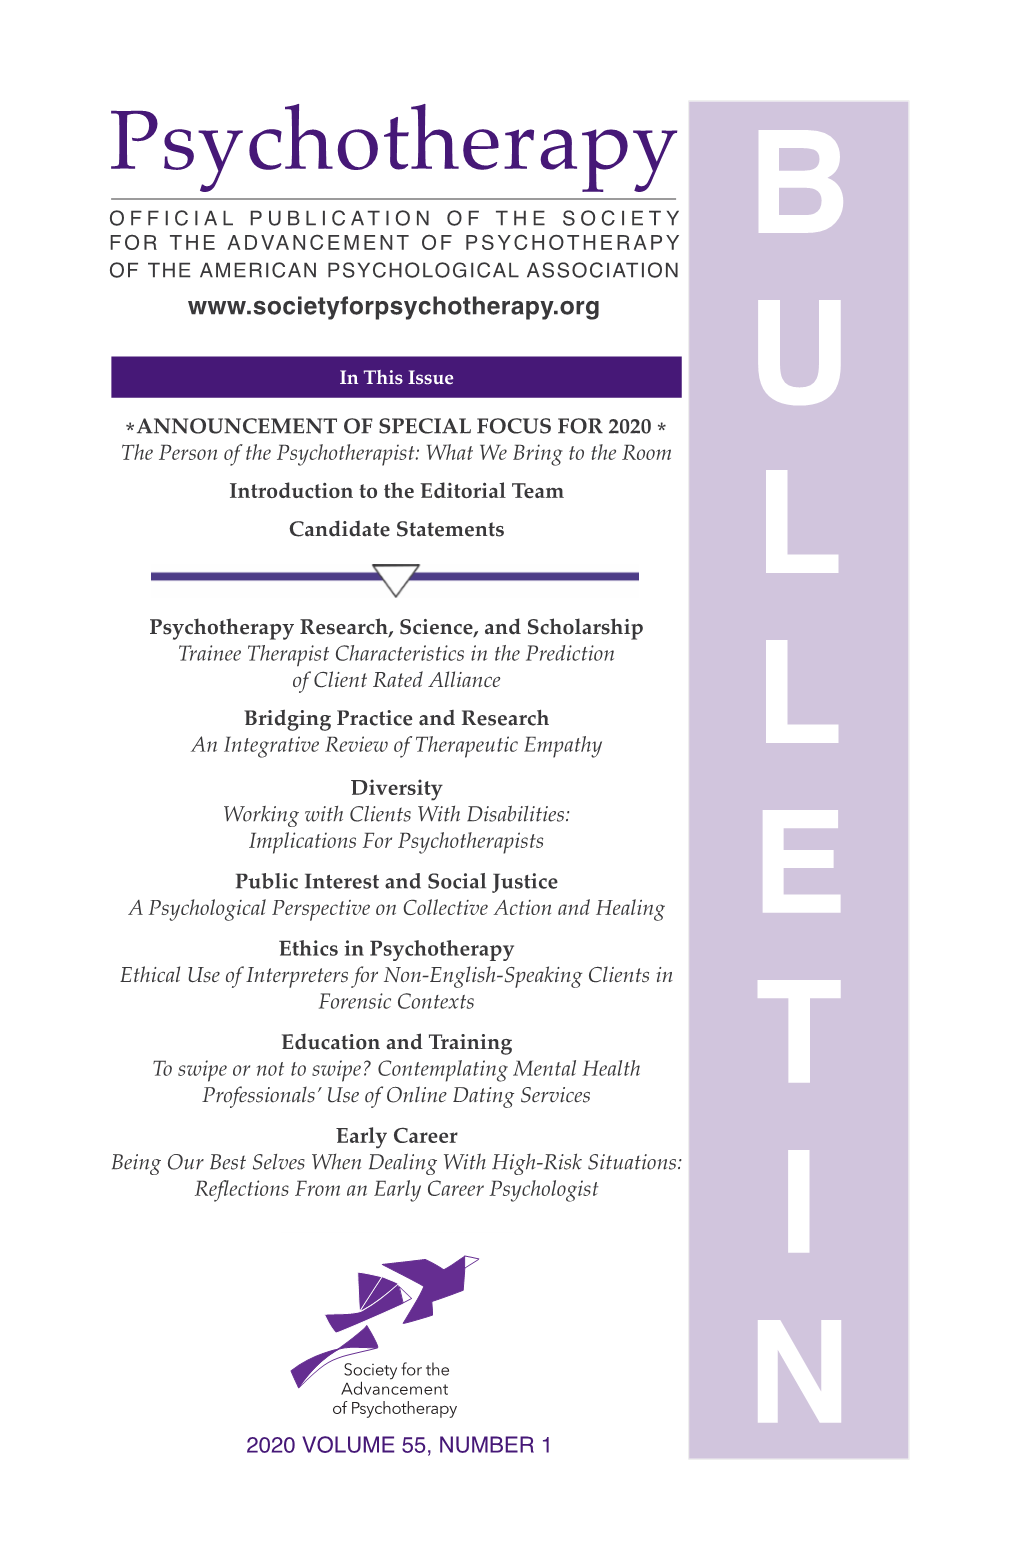 2020 Psychotherapy Bulletin, Volume 55, Number 1